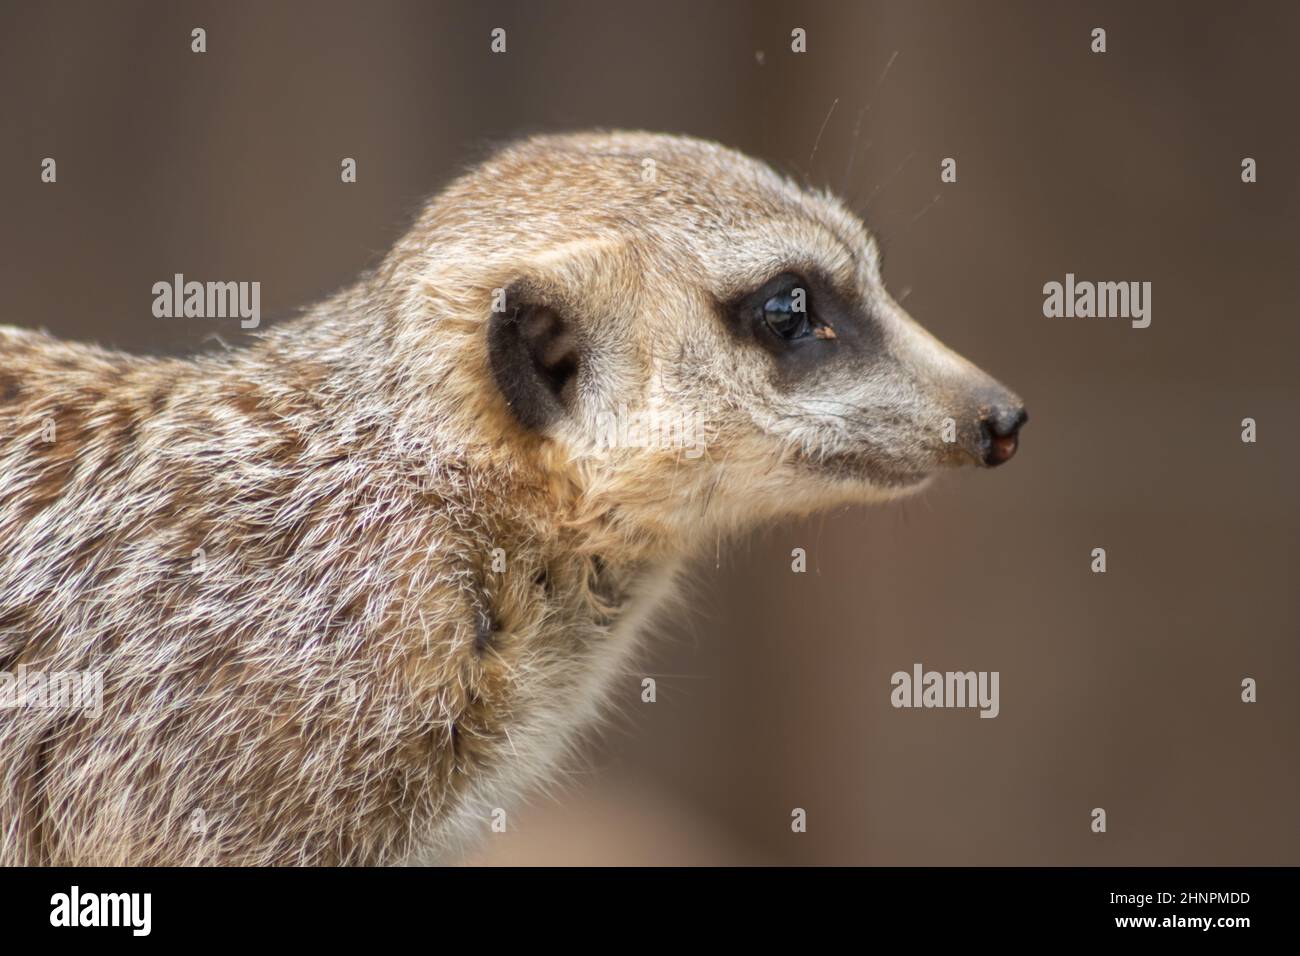 The meerkat (Suricata suricatta), also called Surikate or outdated Scharrtier, is a species of mammal from the mongoose family (Herpestidae). Stock Photo